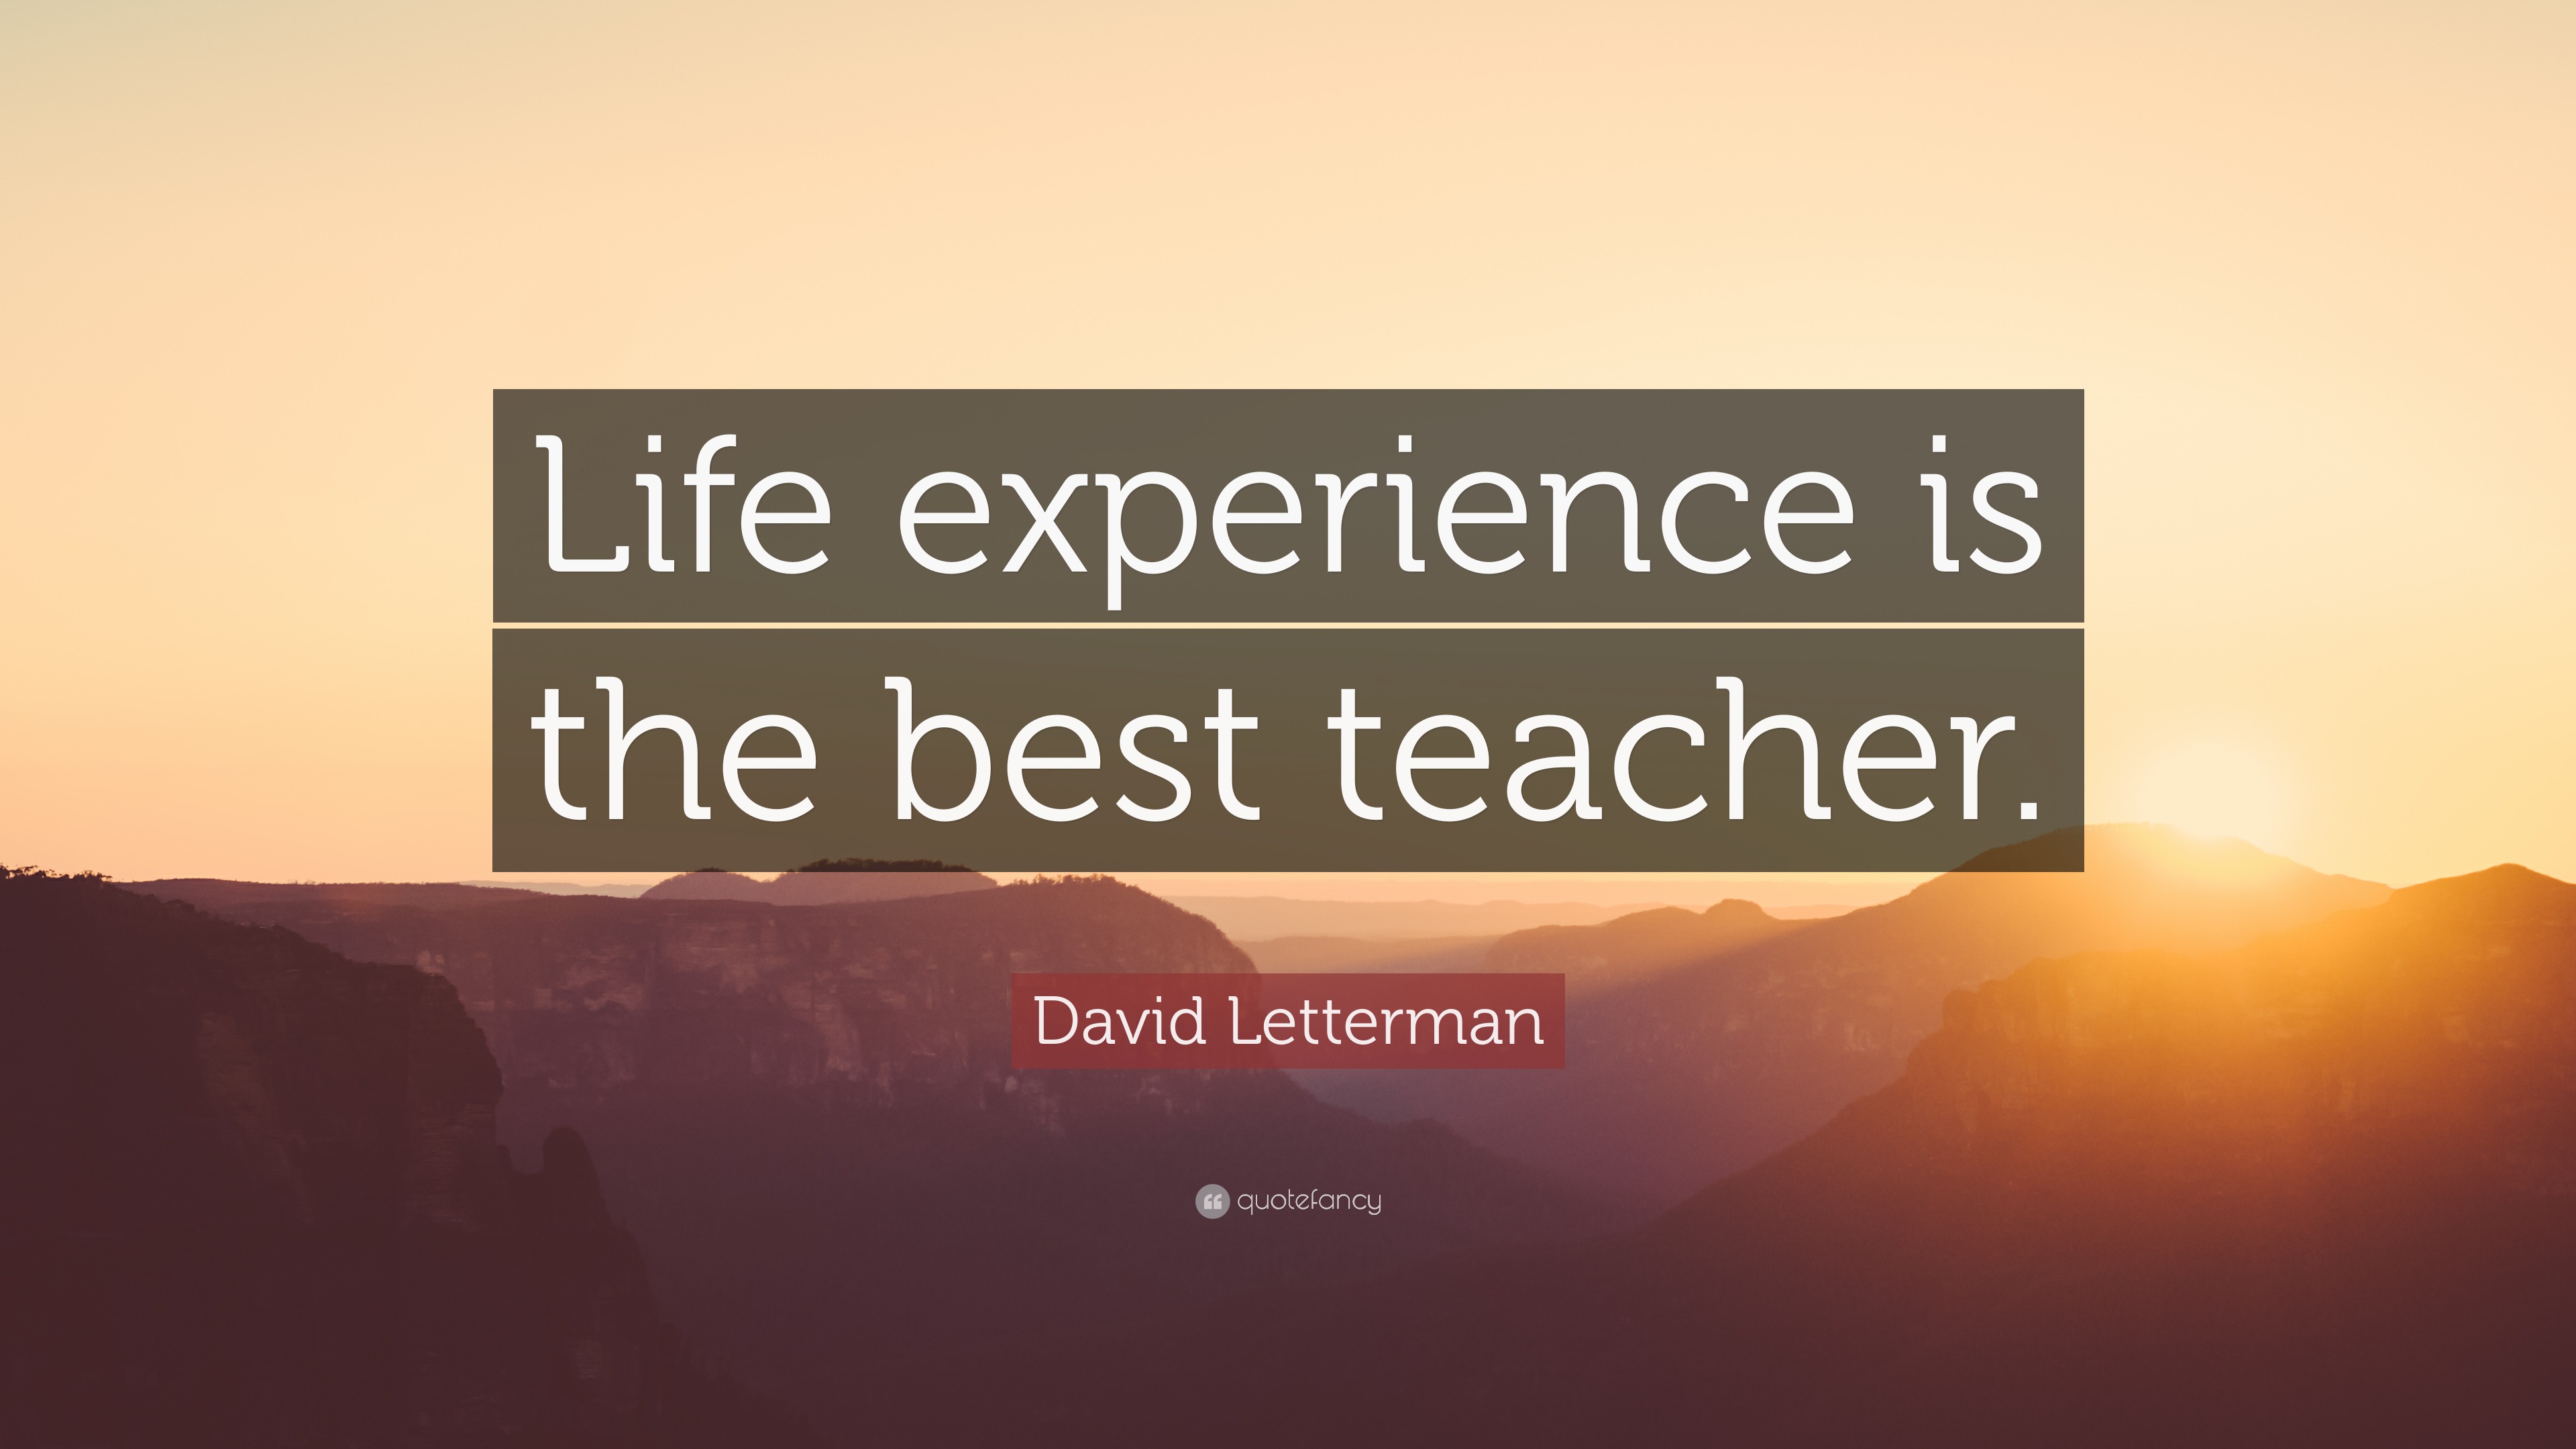 David Letterman Quote: “Life experience is the best teacher.”